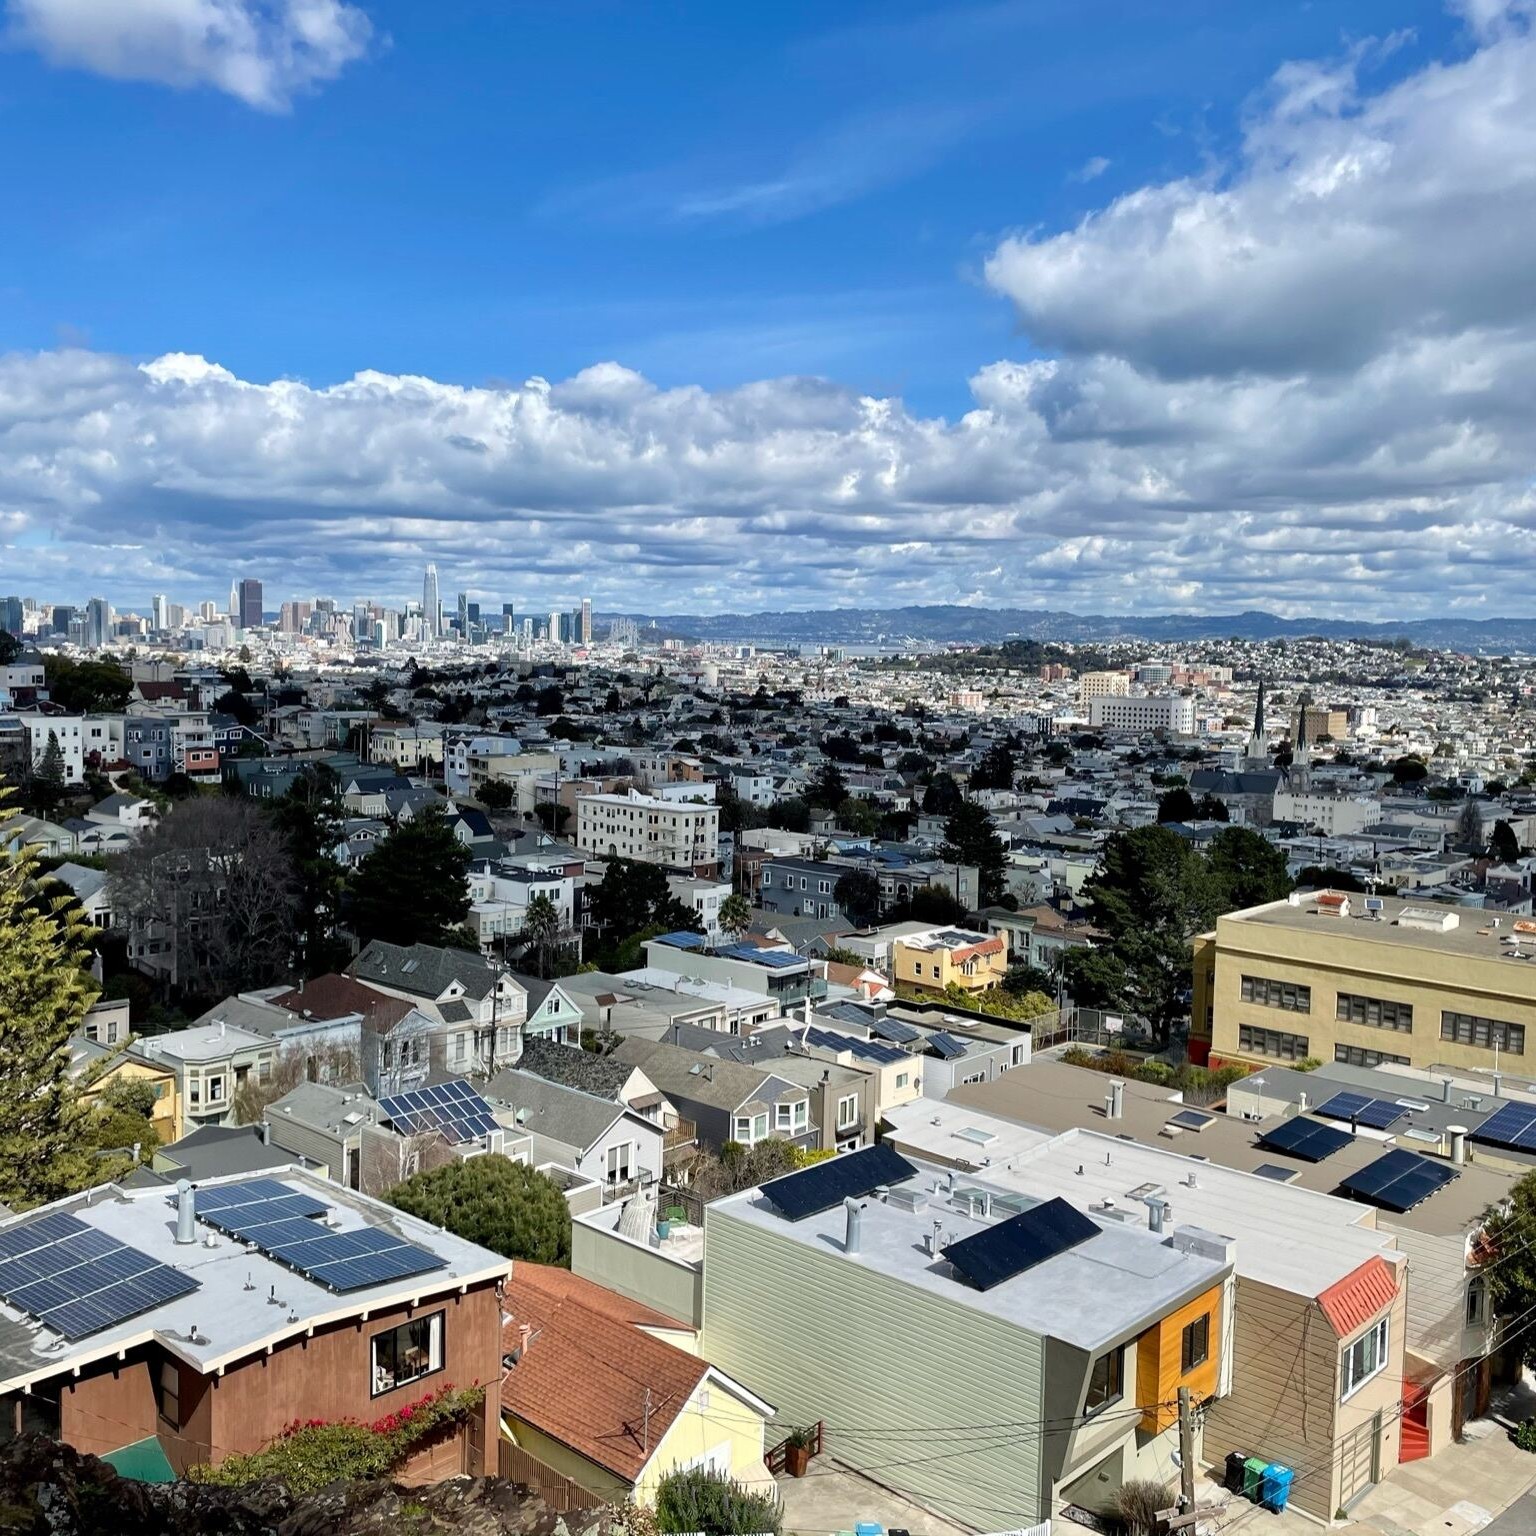 Solar panels seen from an aerial vantage point on residences in San Francisco